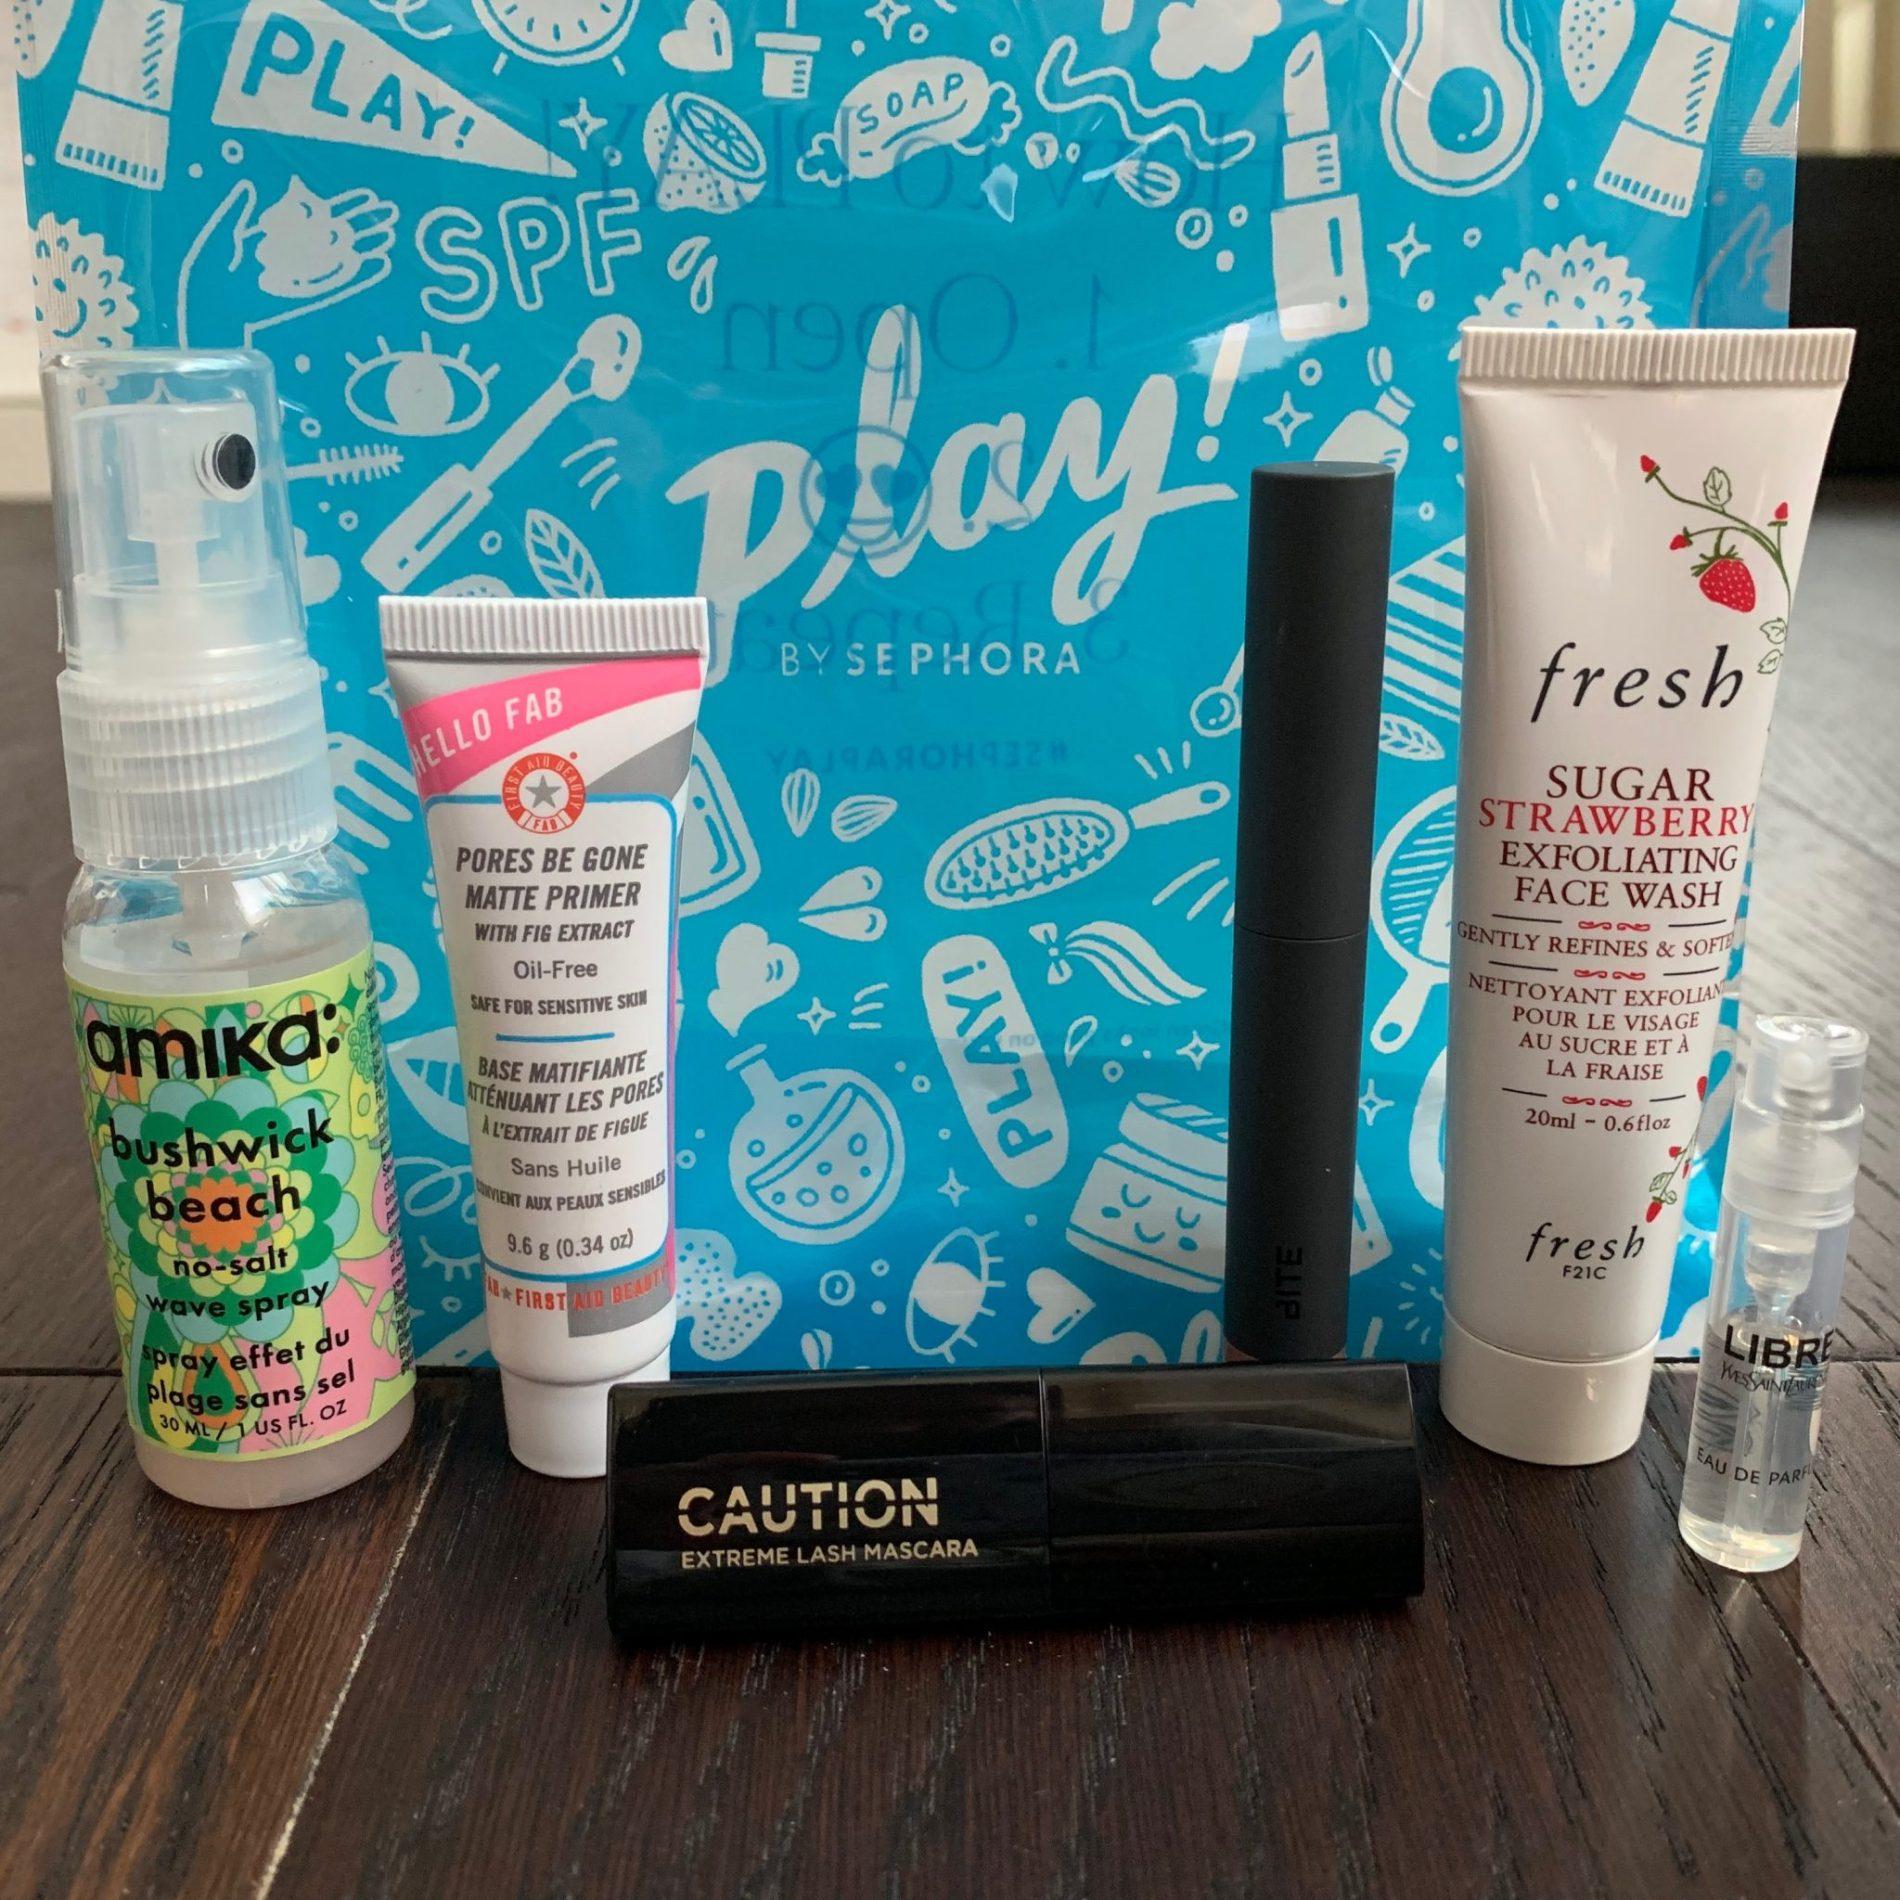 Play! by Sephora Review – September 2019